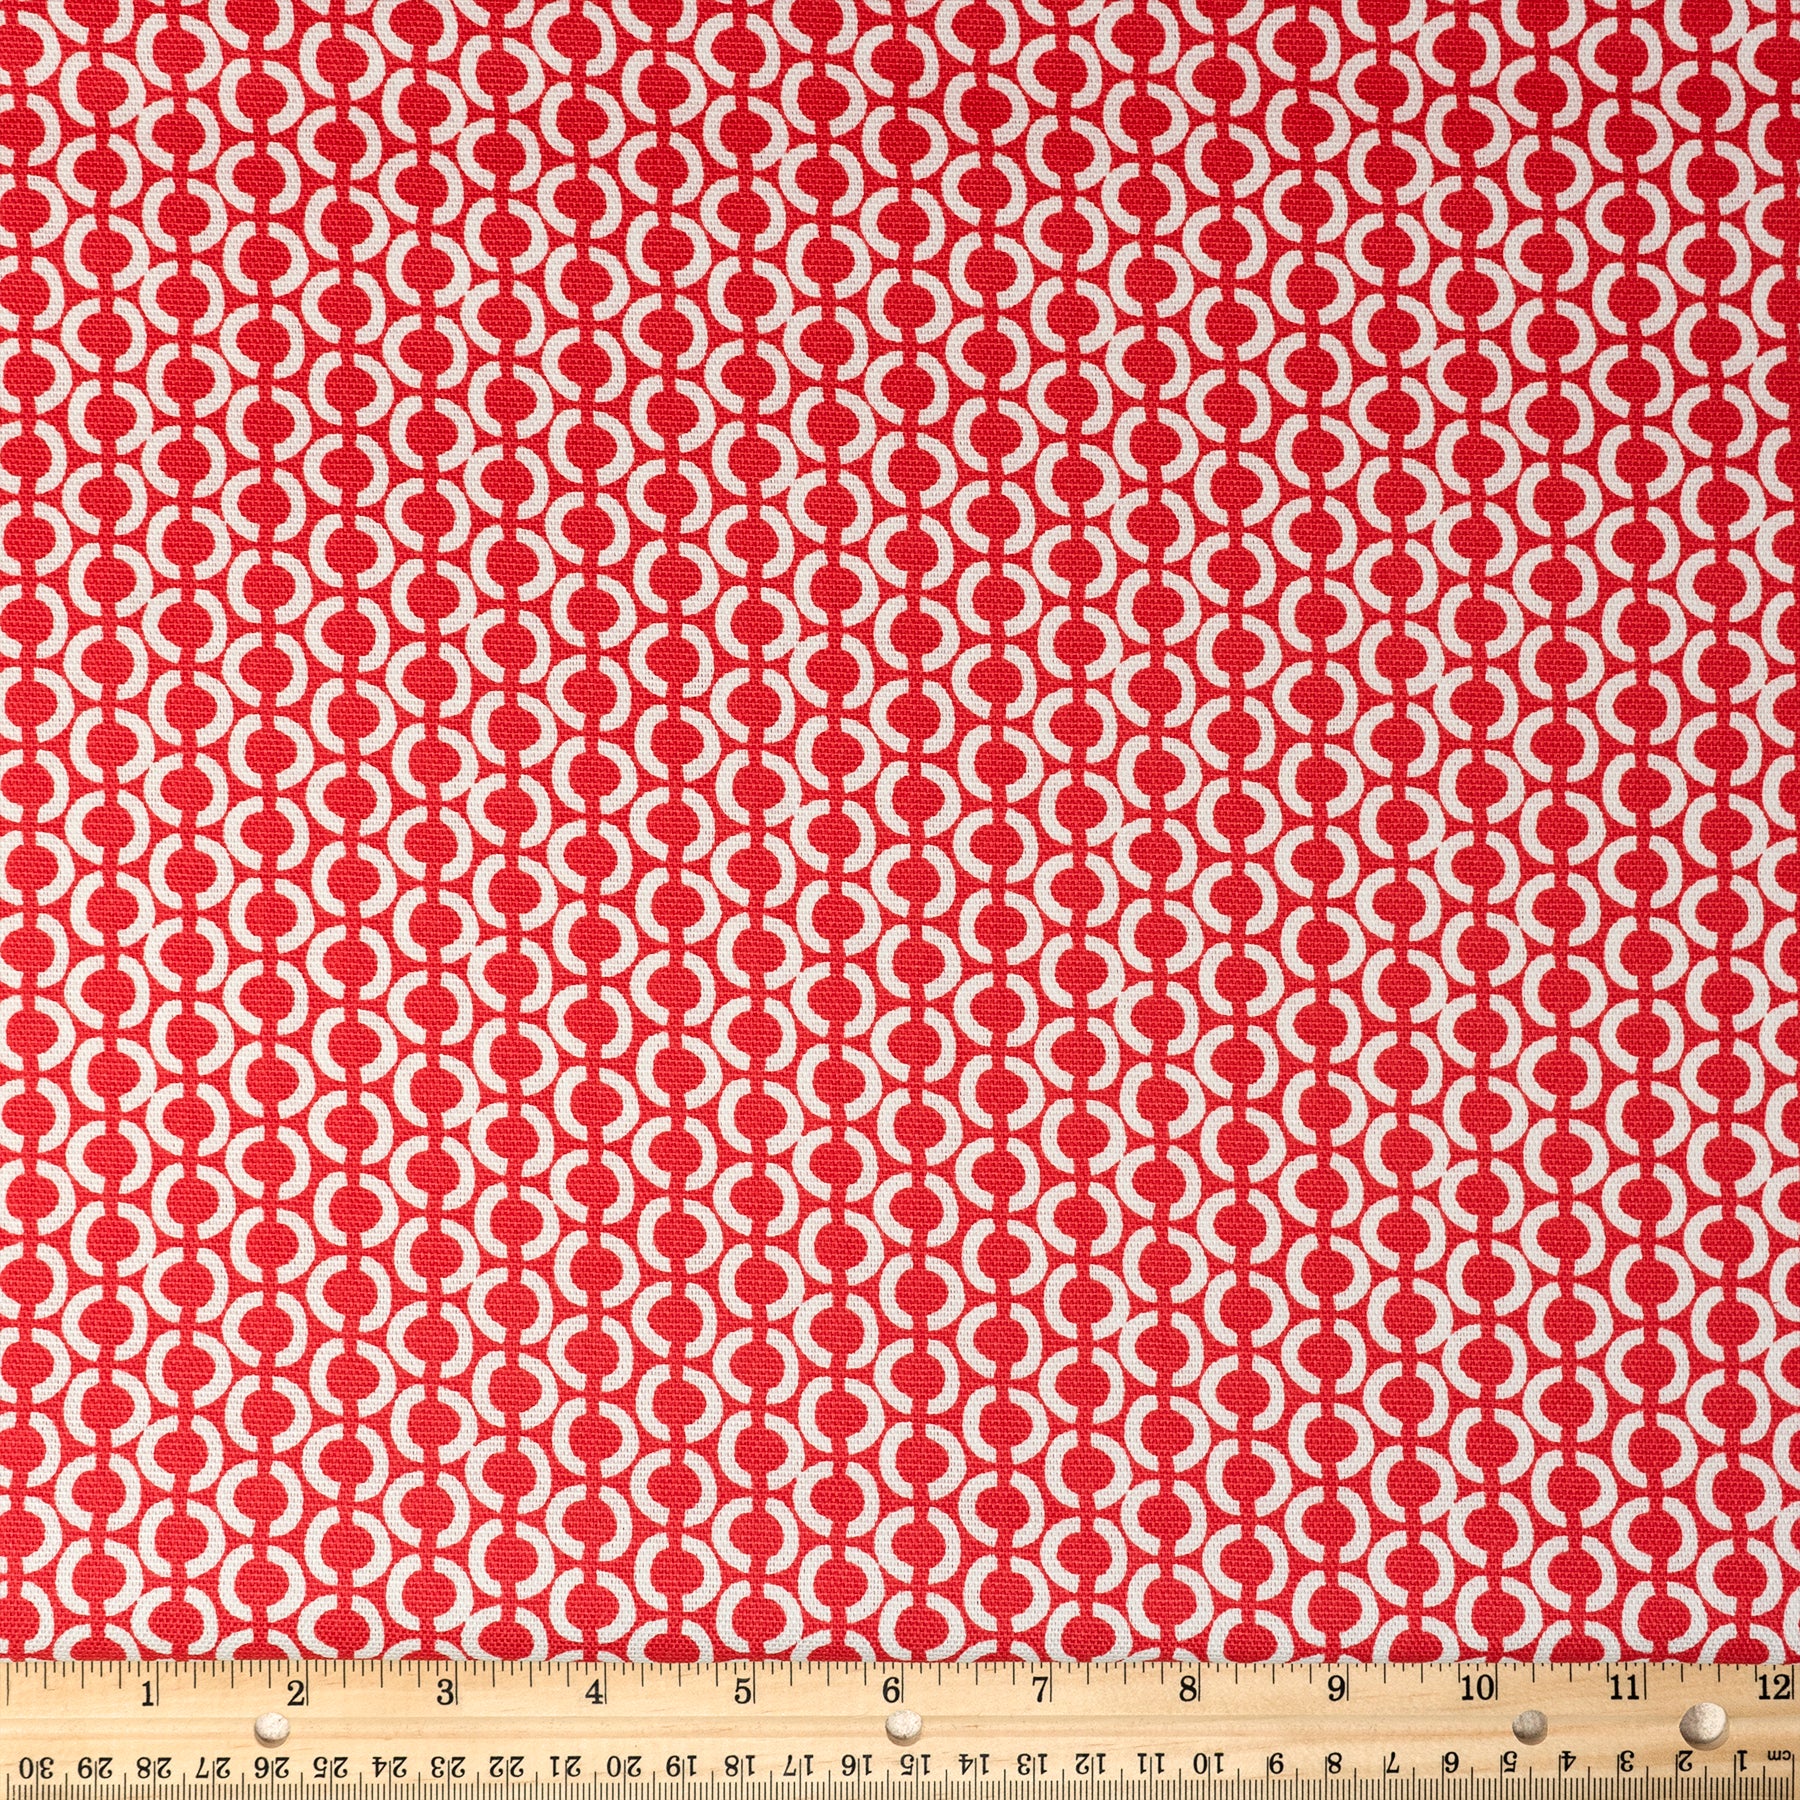 Waverly Inspirations Cotton Duck 54" Chainlink Coral Color Sewing Fabric by the Yard